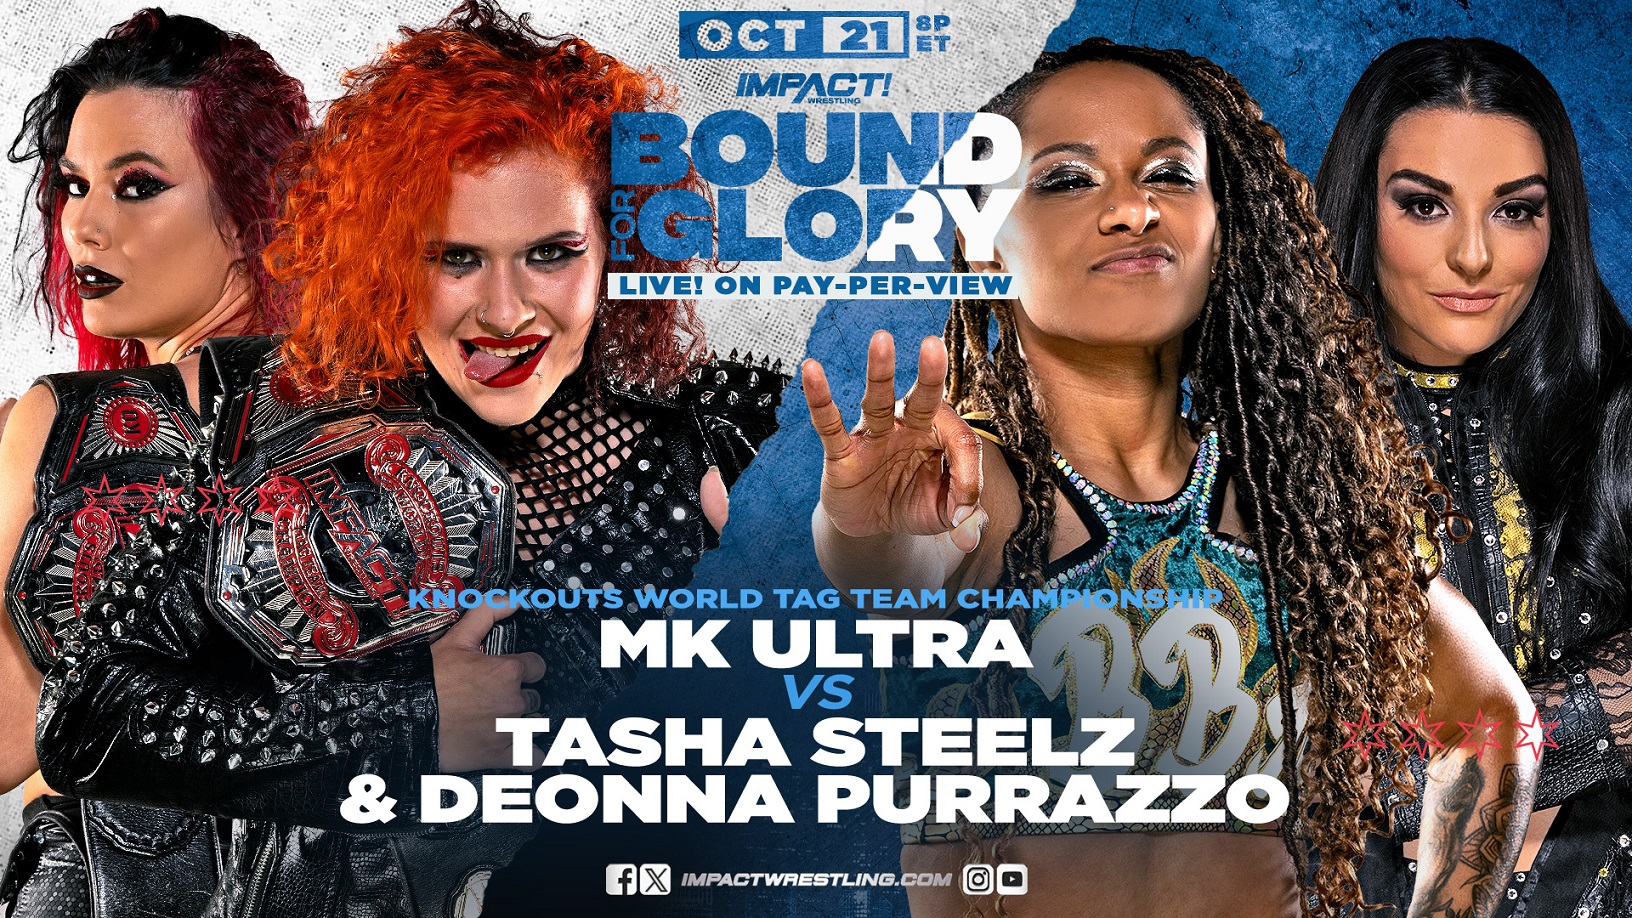 Deonna Purrazzo & Tasha Steelz Unite to Challenge MK Ultra in Knockouts Tag Title Showdown at Bound For Glory – IMPACT Wrestling